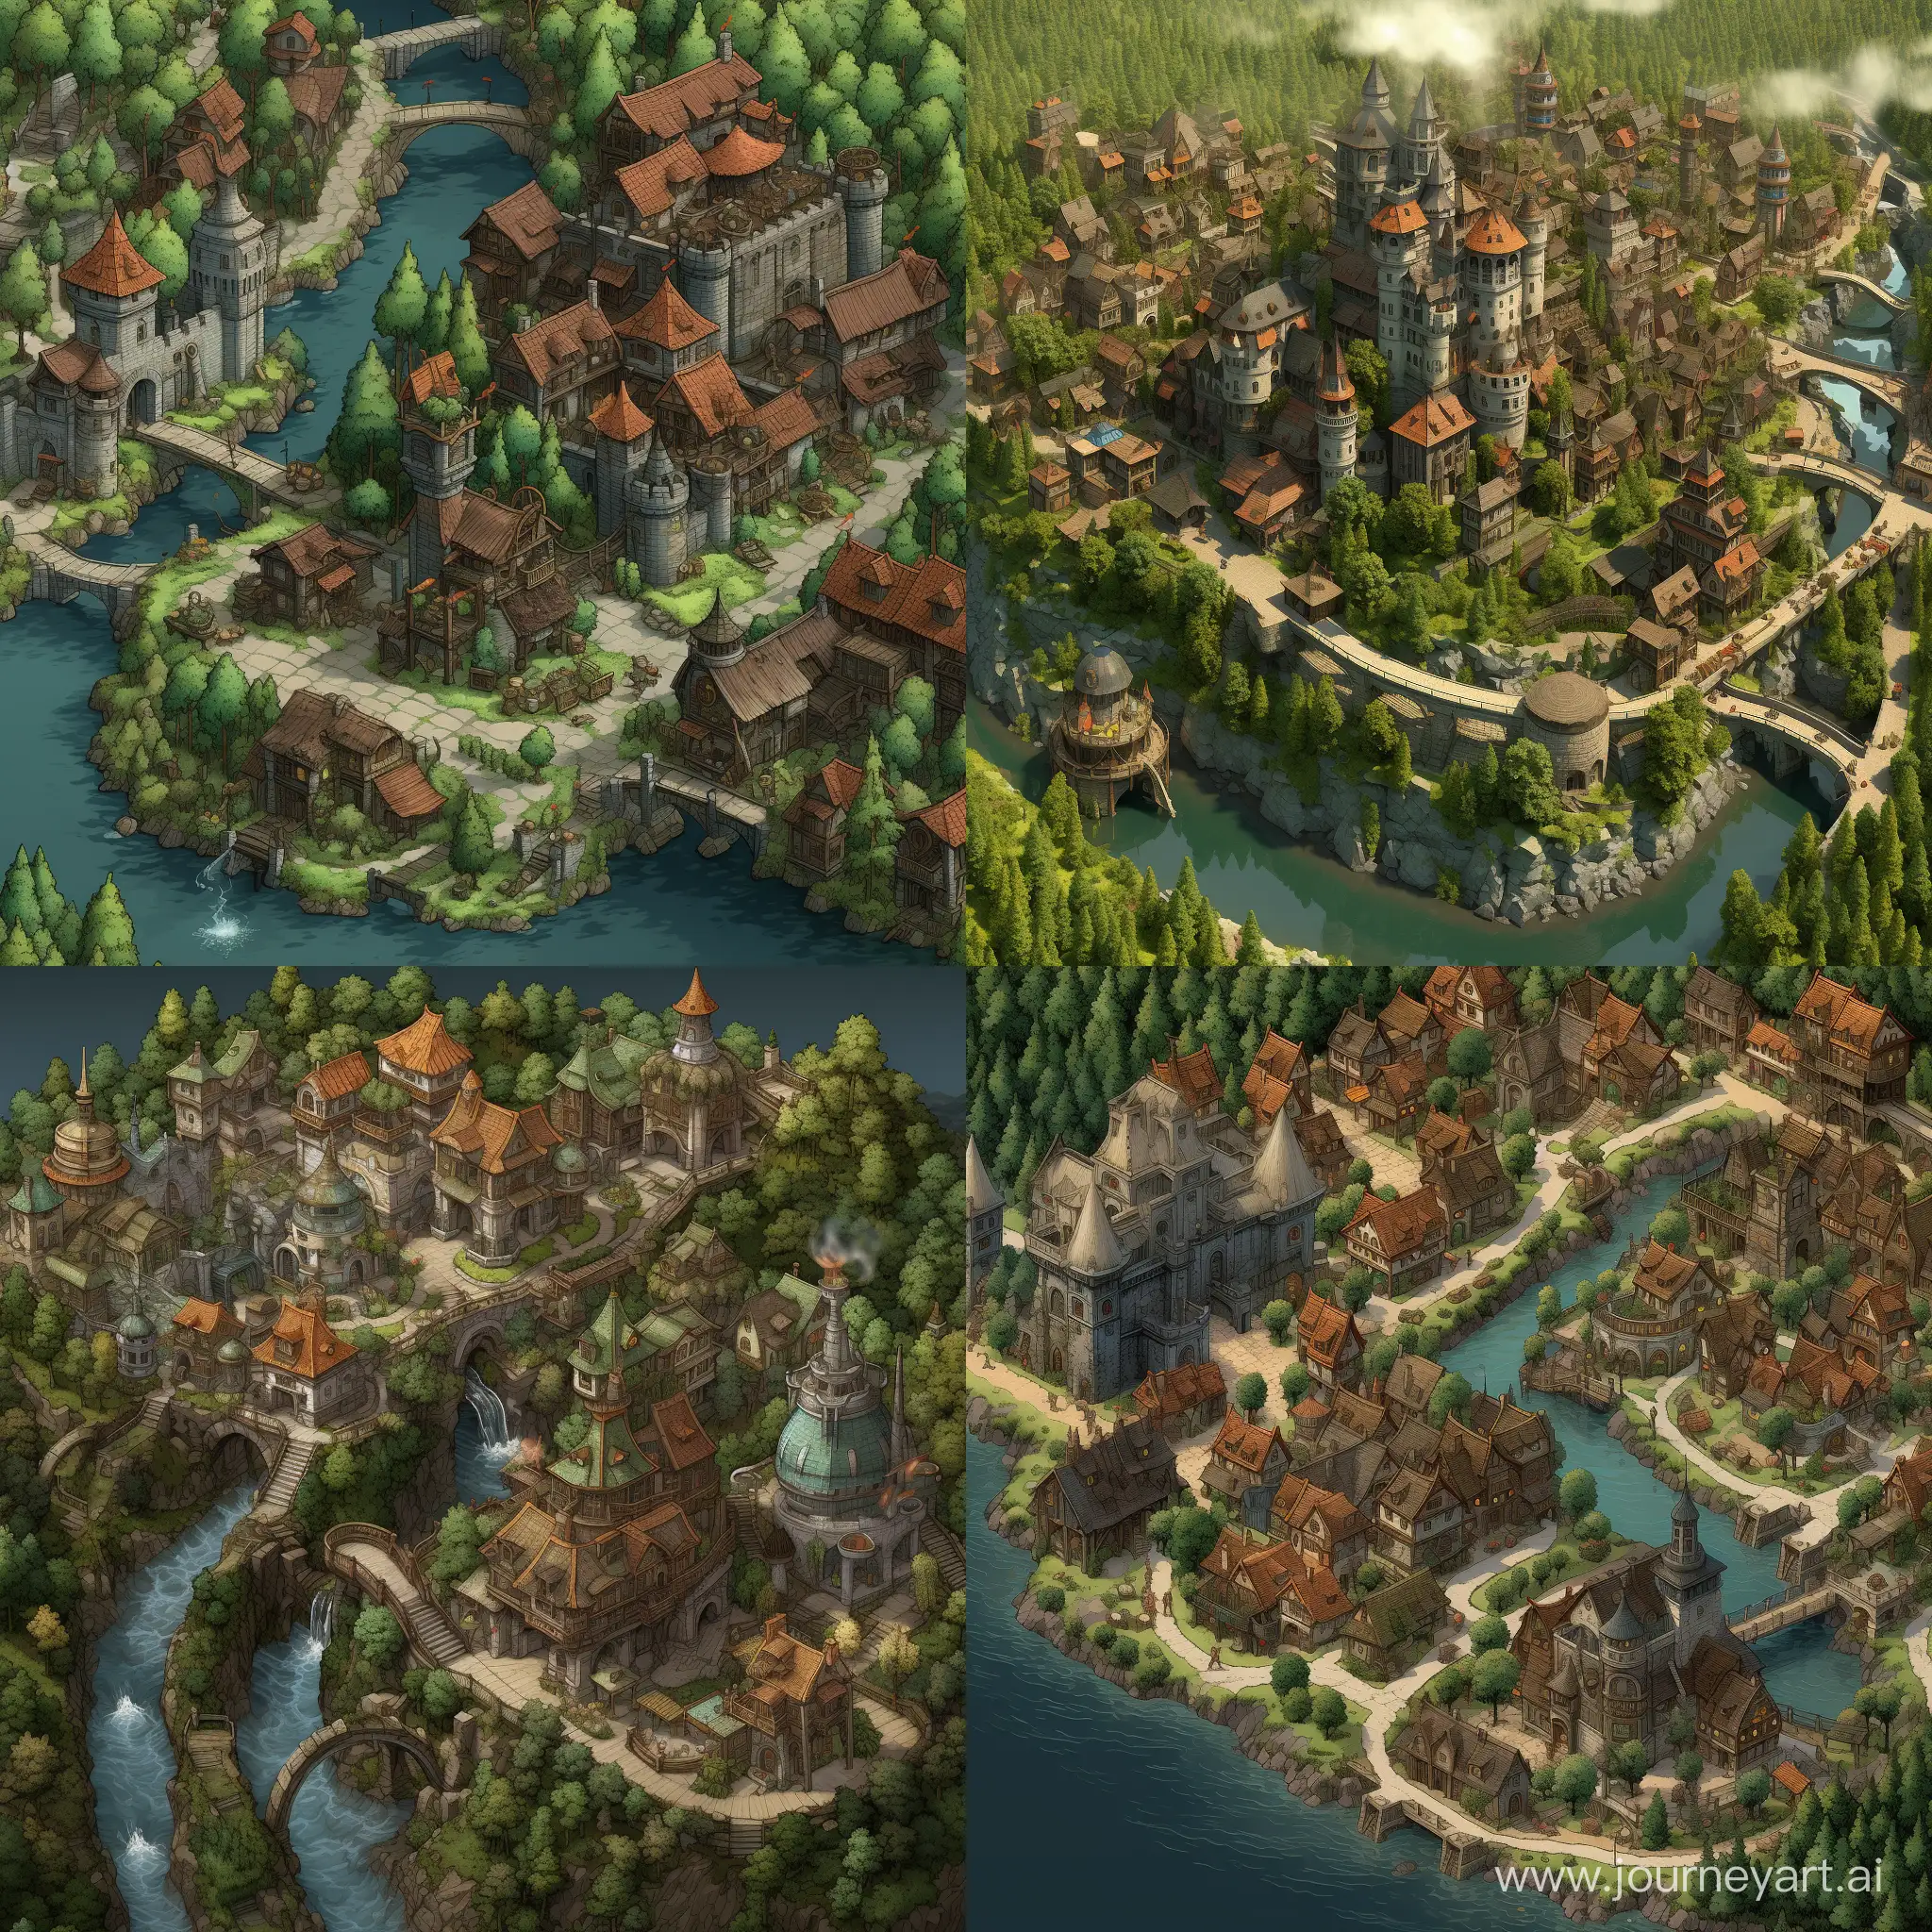 Isometric-Citymap-with-TudorStyle-Buildings-and-Enchanting-Forest-Surroundings